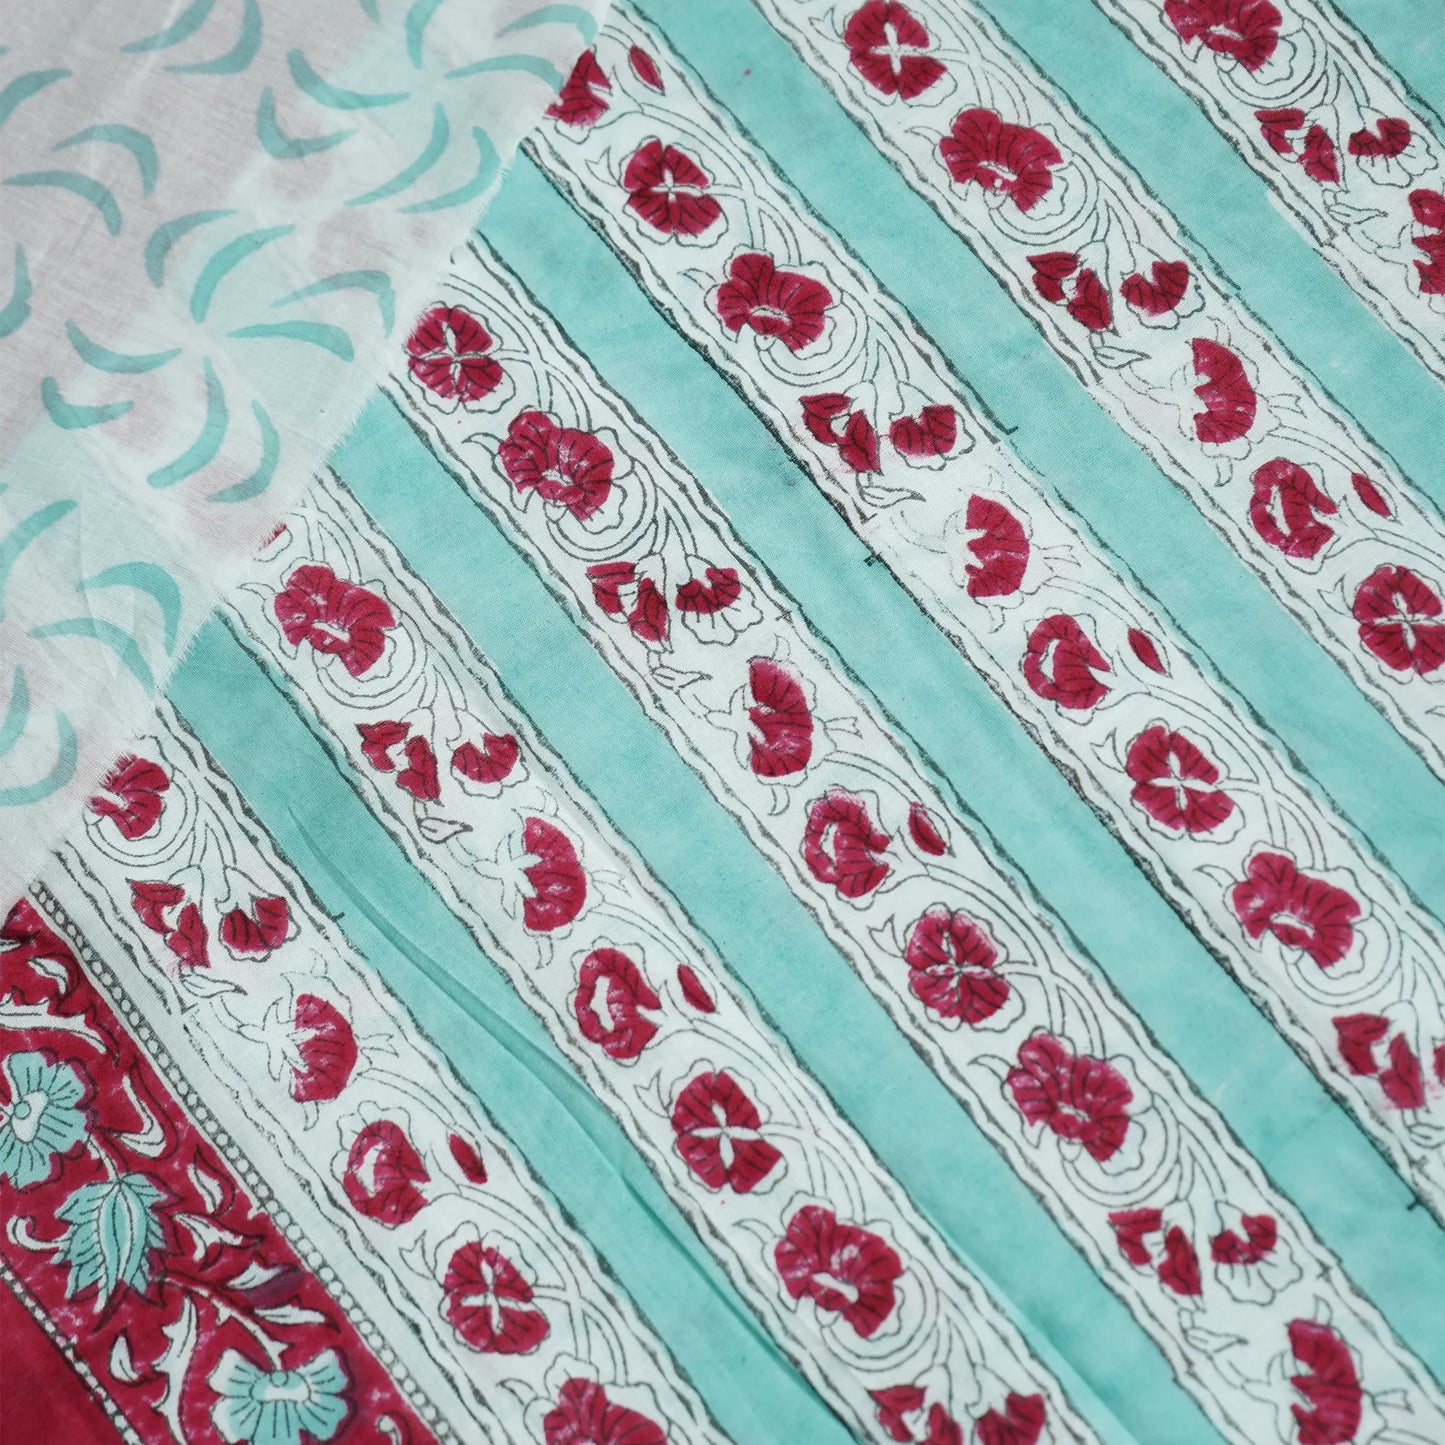 Spring Blossom: Hand Block Printed Cotton Saree in Pistachio, White, and Rani Pink with Floral Motif